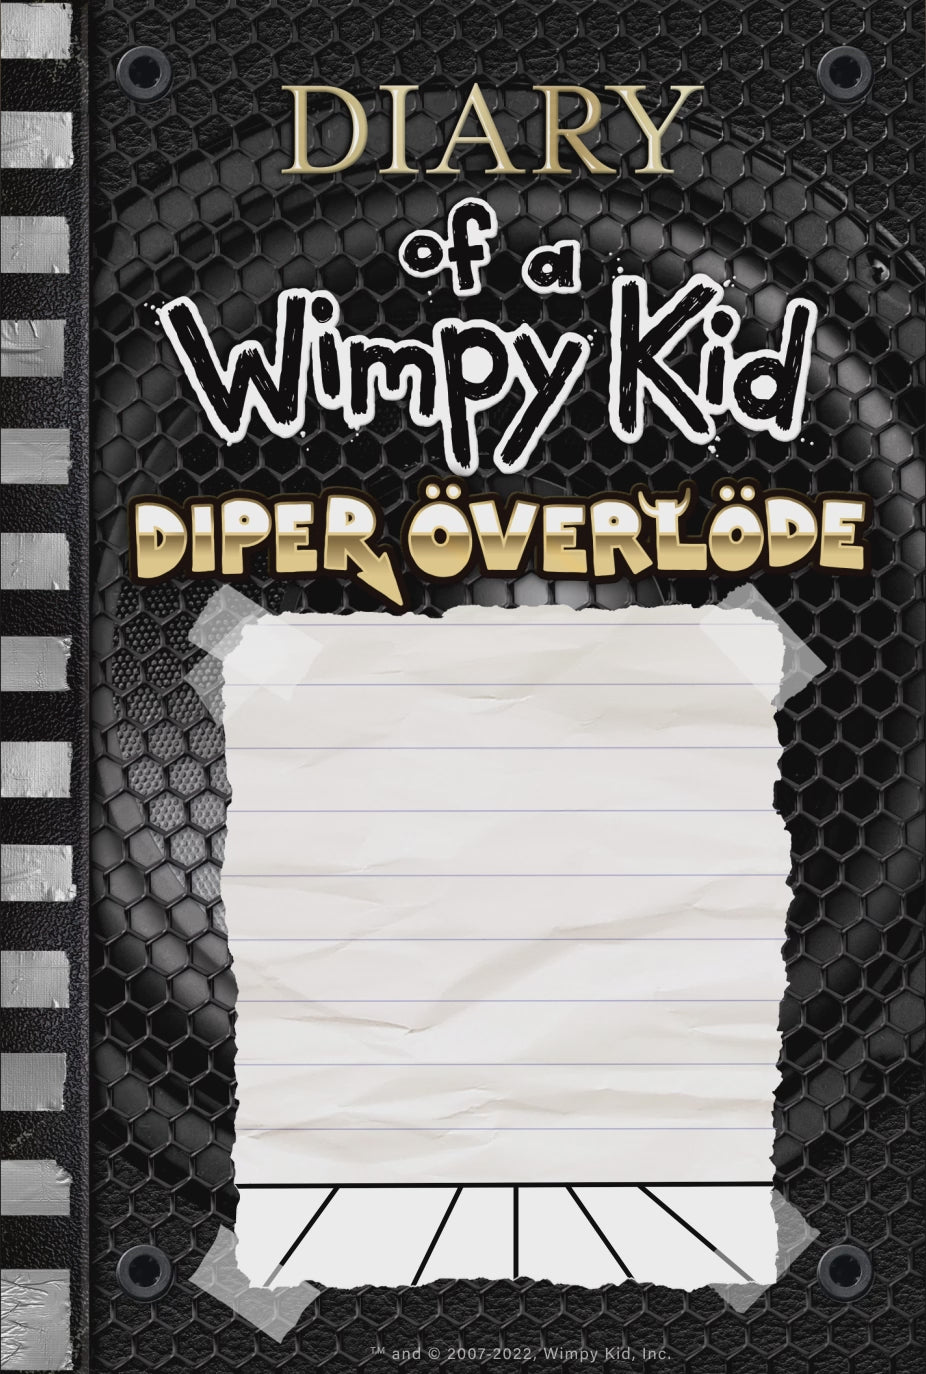 Inside the New Diary of a Wimpy Kid With Creator Jeff Kinney and